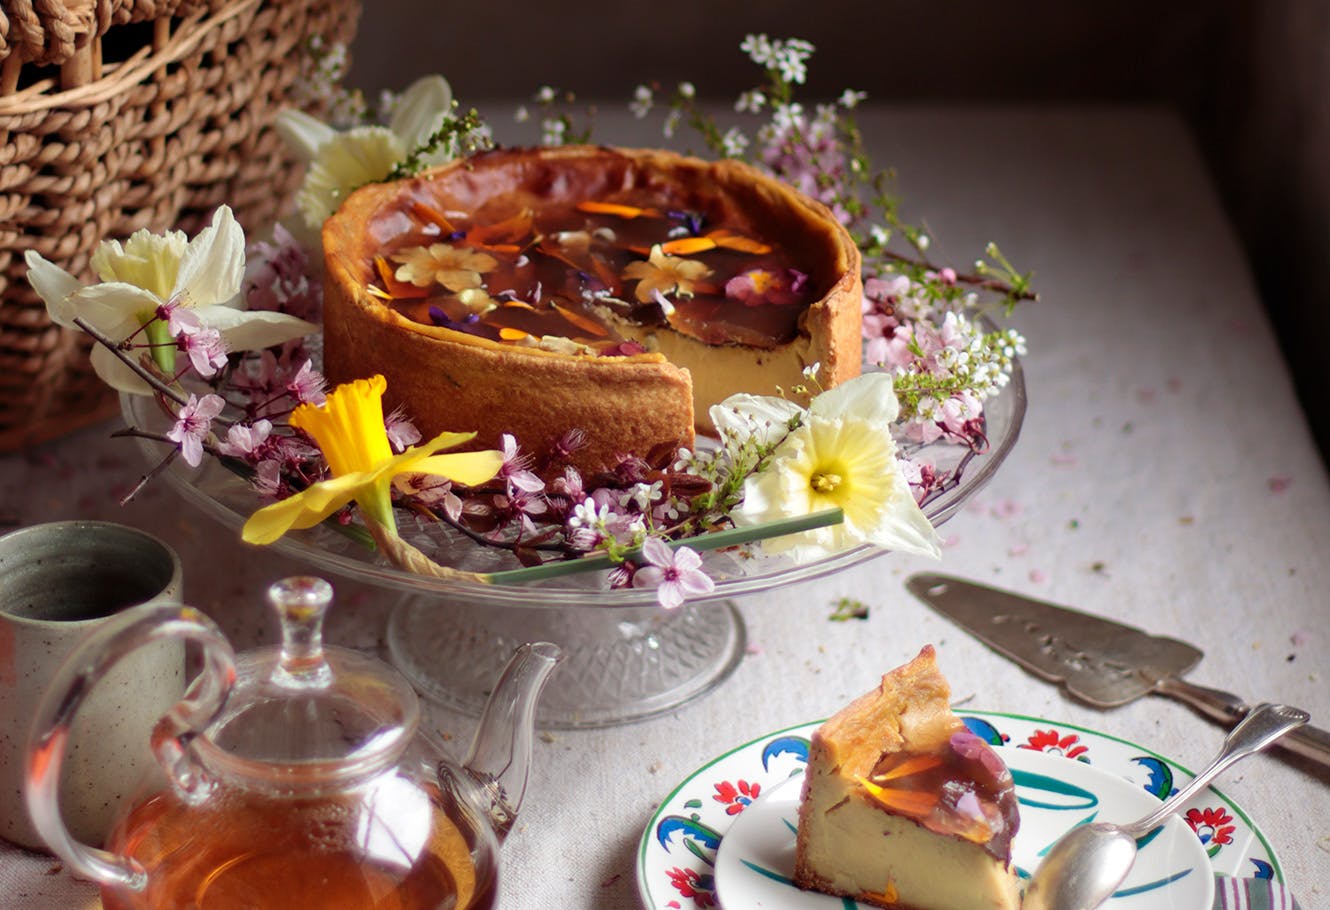 Pastry flan with white tea and flower jelly on a table.